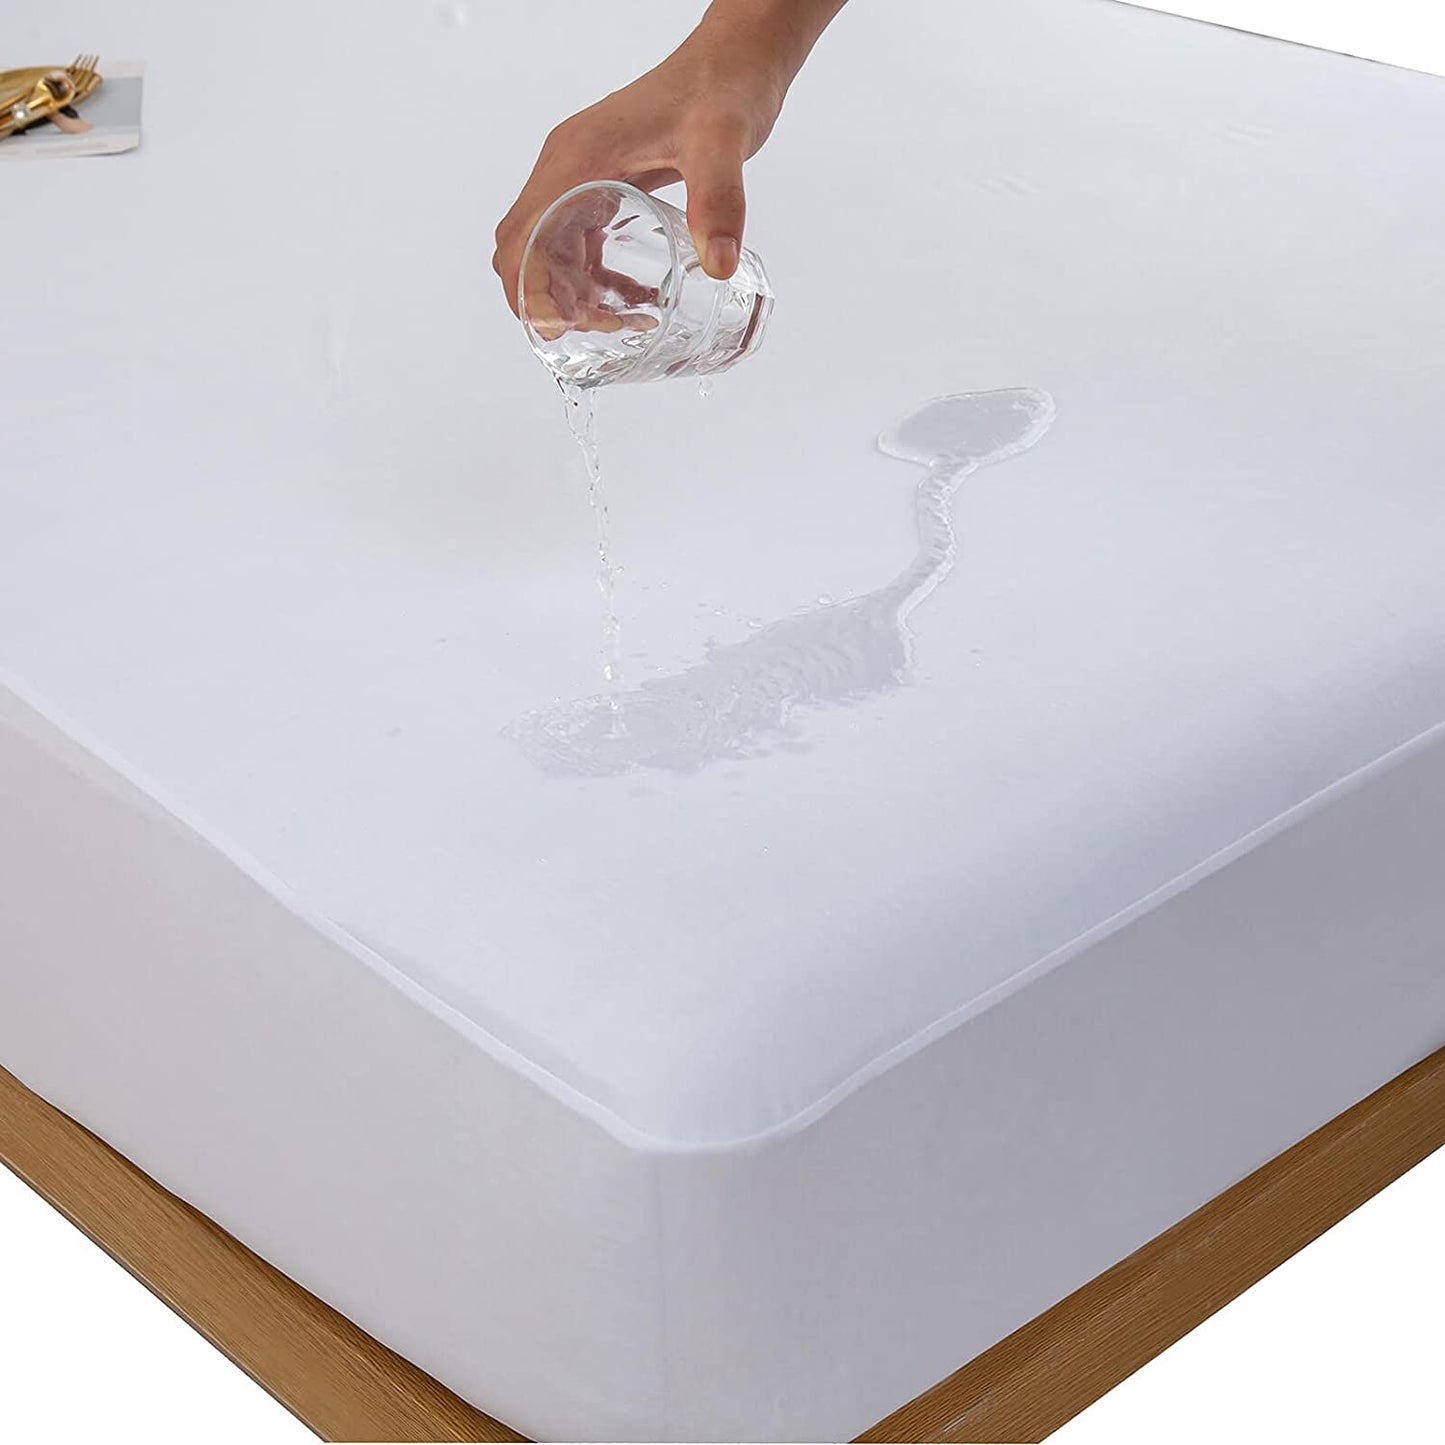 Cooling Bamboo Viscose Mattress Protector Waterproof Ultra Soft Smooth Top Fitted Matressprotector Cover with Stretchy Pocket Twin Size